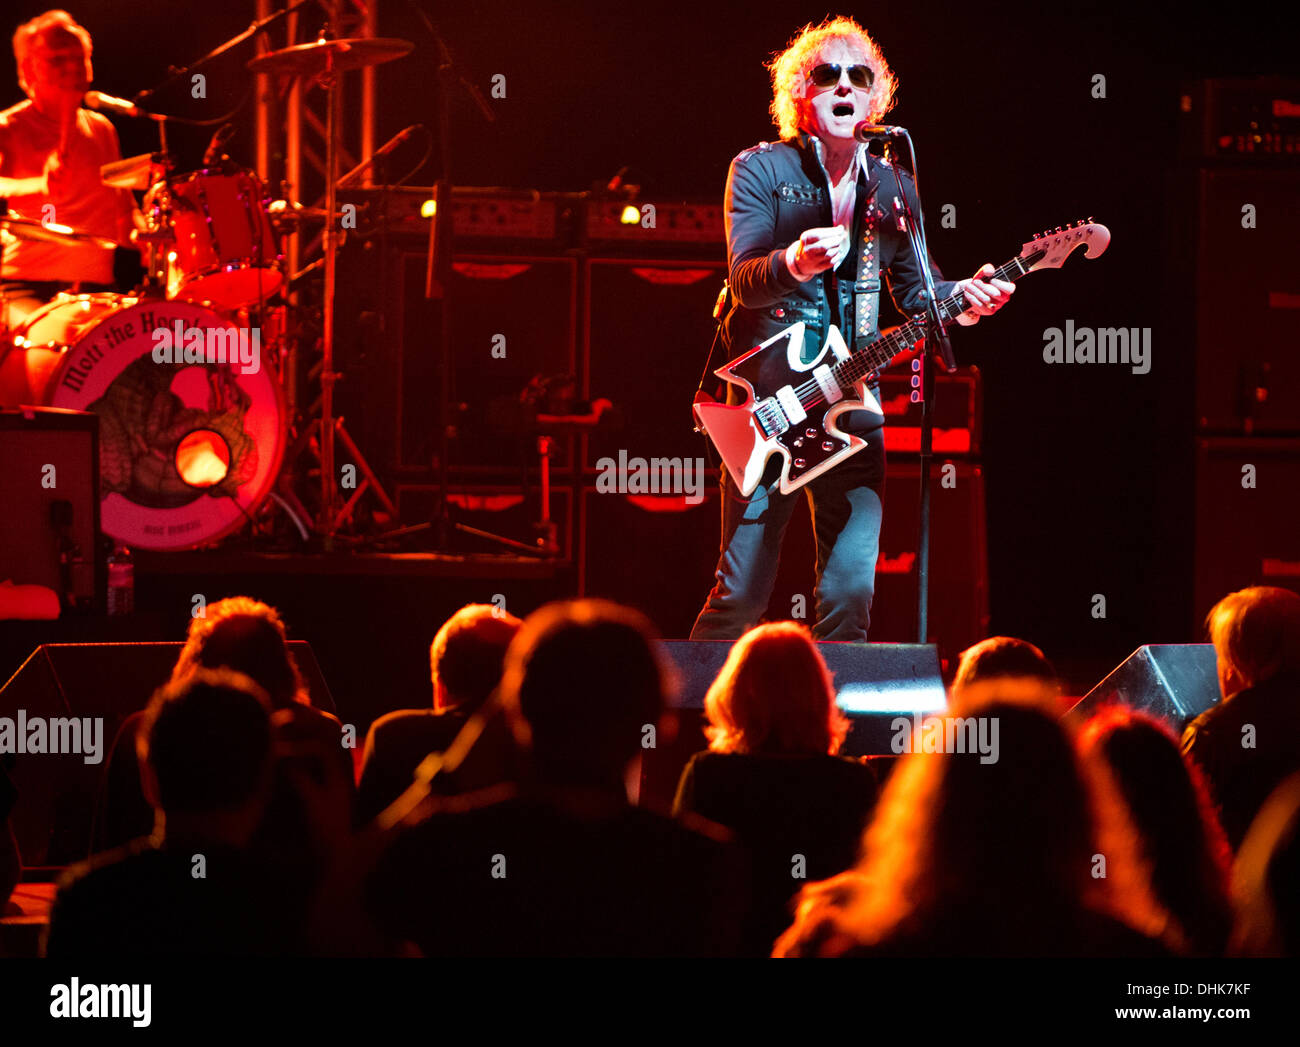 Birmingham, UK . 11th Nov, 2013. Reformed 1970s rock band Mott the Hoople play the first concert of their UK tour at Birmingham Symphony Hall, 11 October 2013. Lead singer Ian Hunter with dark glasses. © John Bentley/Alamy Live News Stock Photo